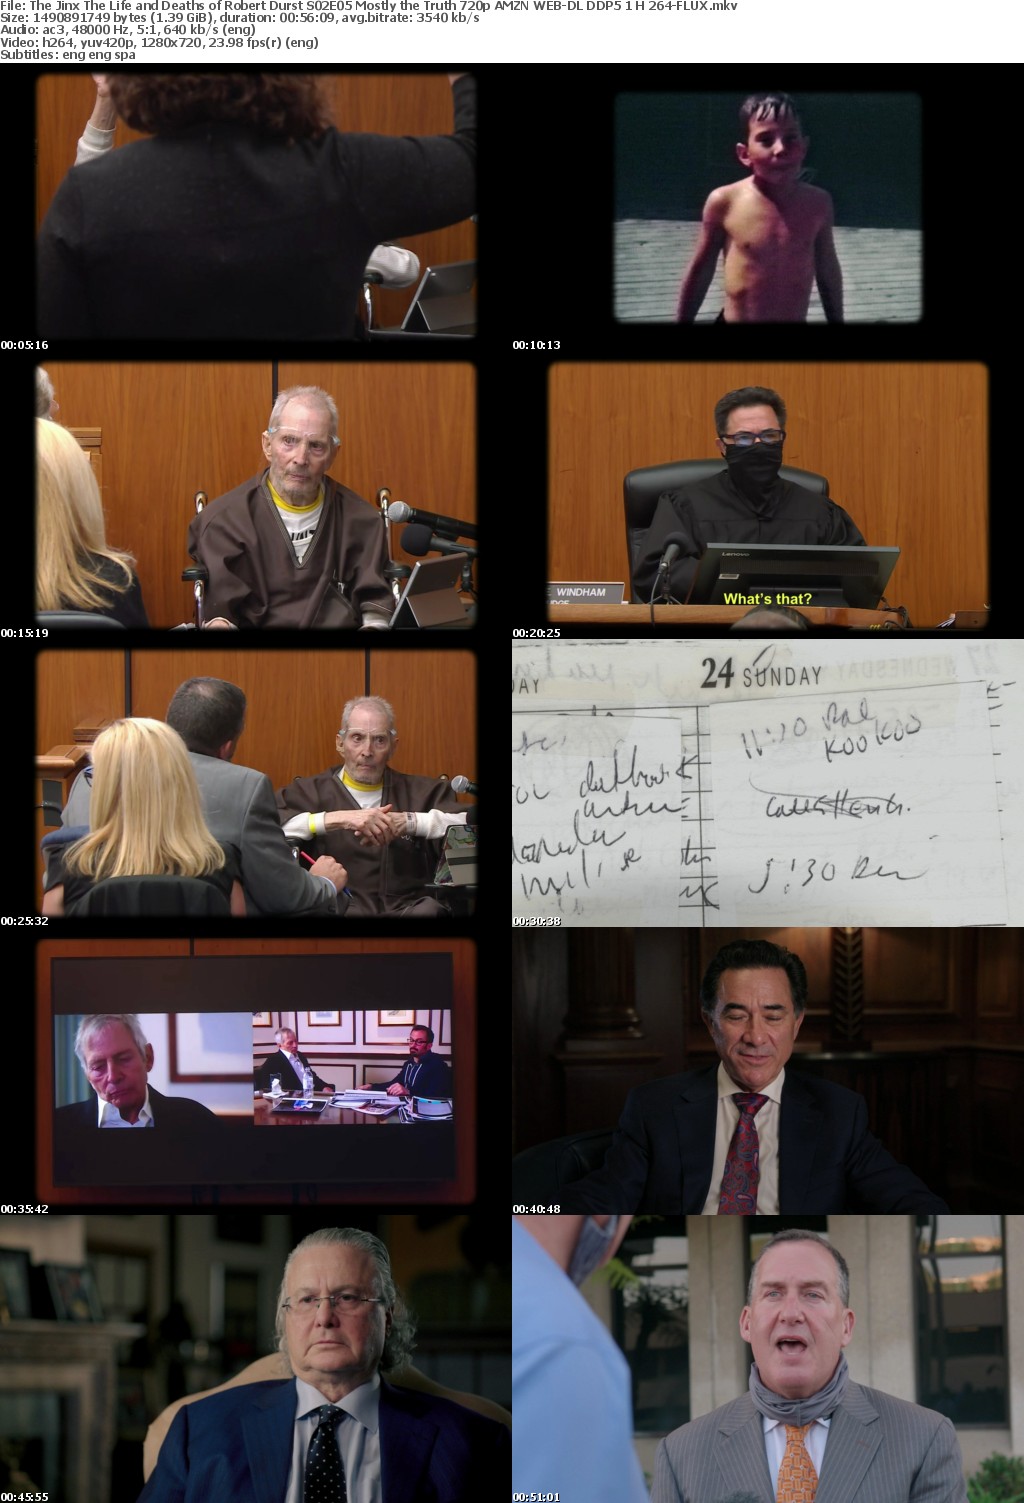 The Jinx The Life and Deaths of Robert Durst S02E05 Mostly the Truth 720p AMZN WEB-DL DDP5 1 H 264-FLUX